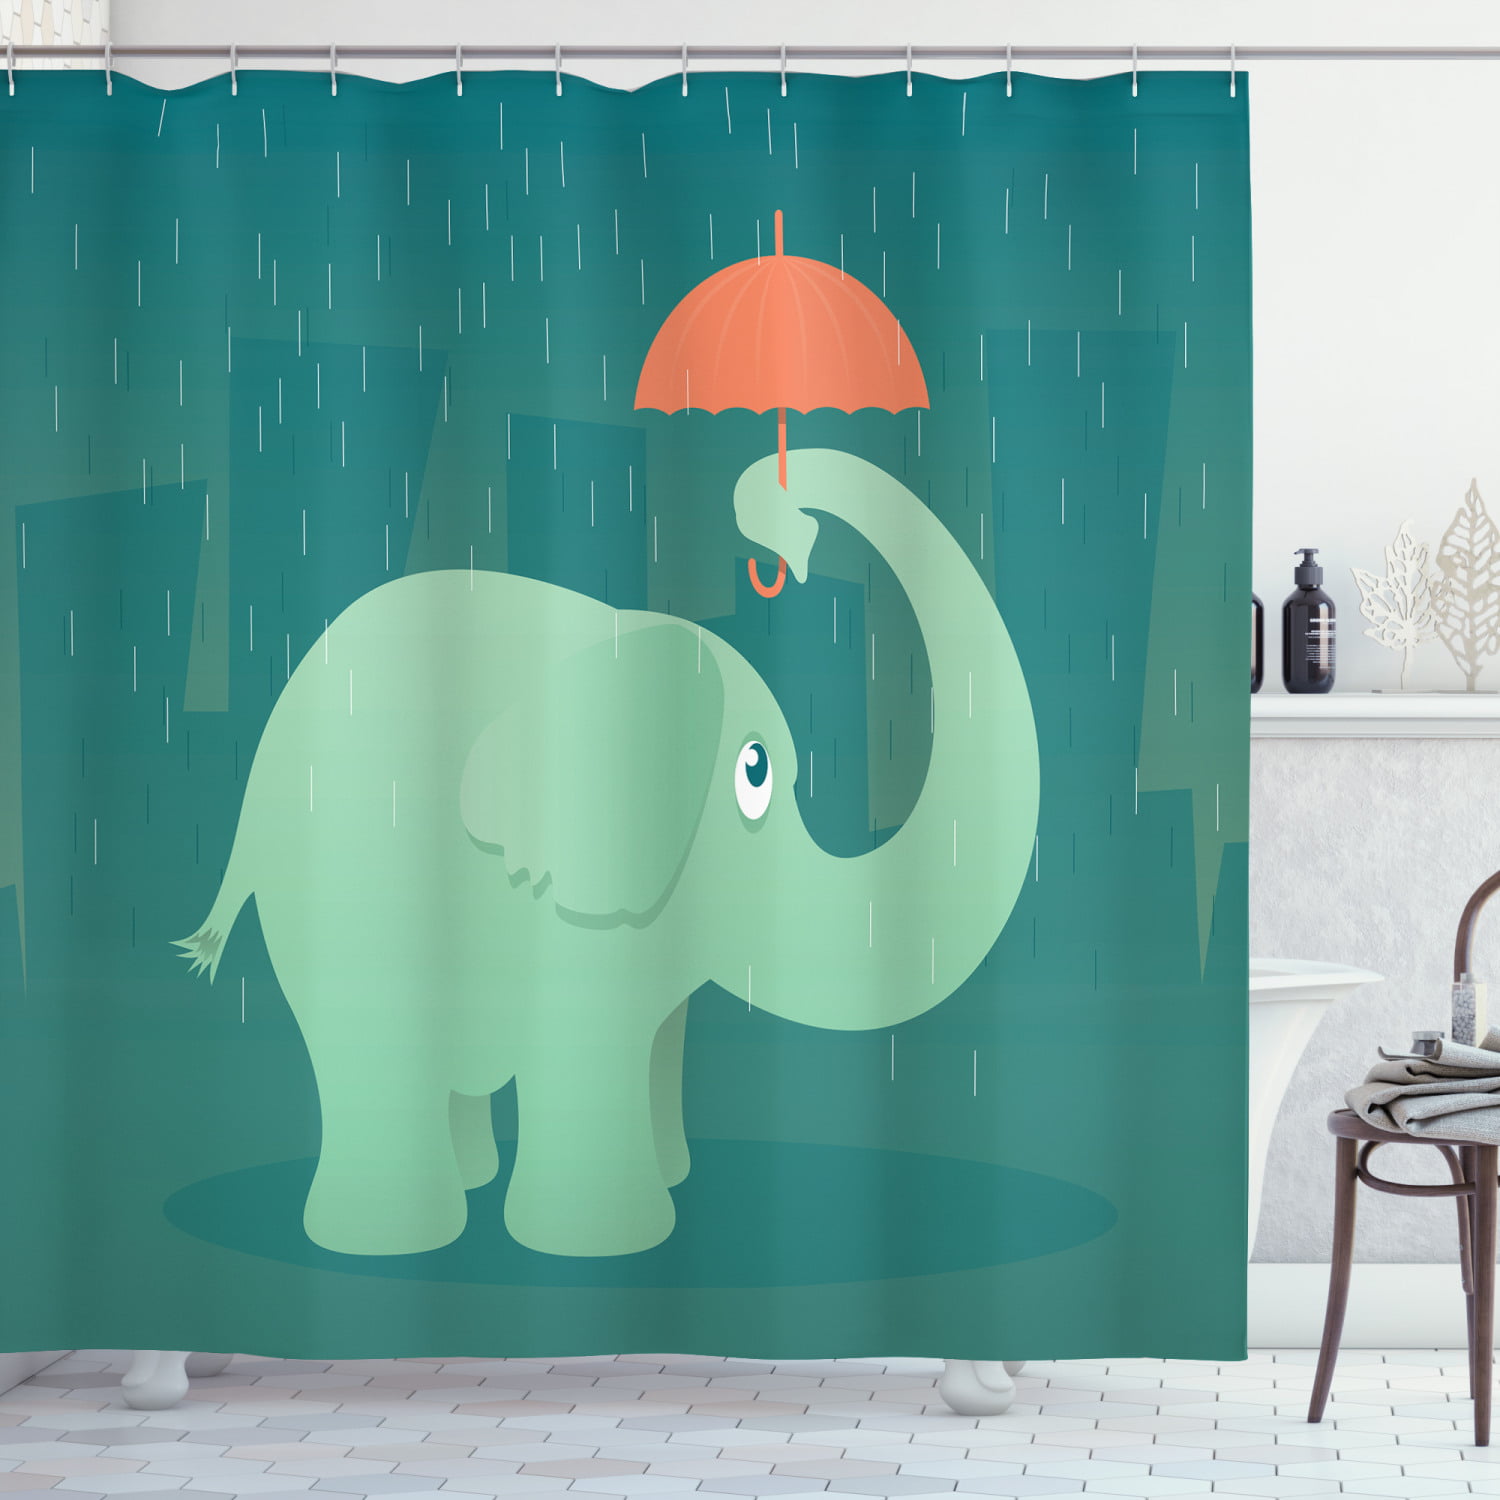 Elephant in the jungle Shower Curtain Bathroom Fabric & 12hooks 71*71inches 